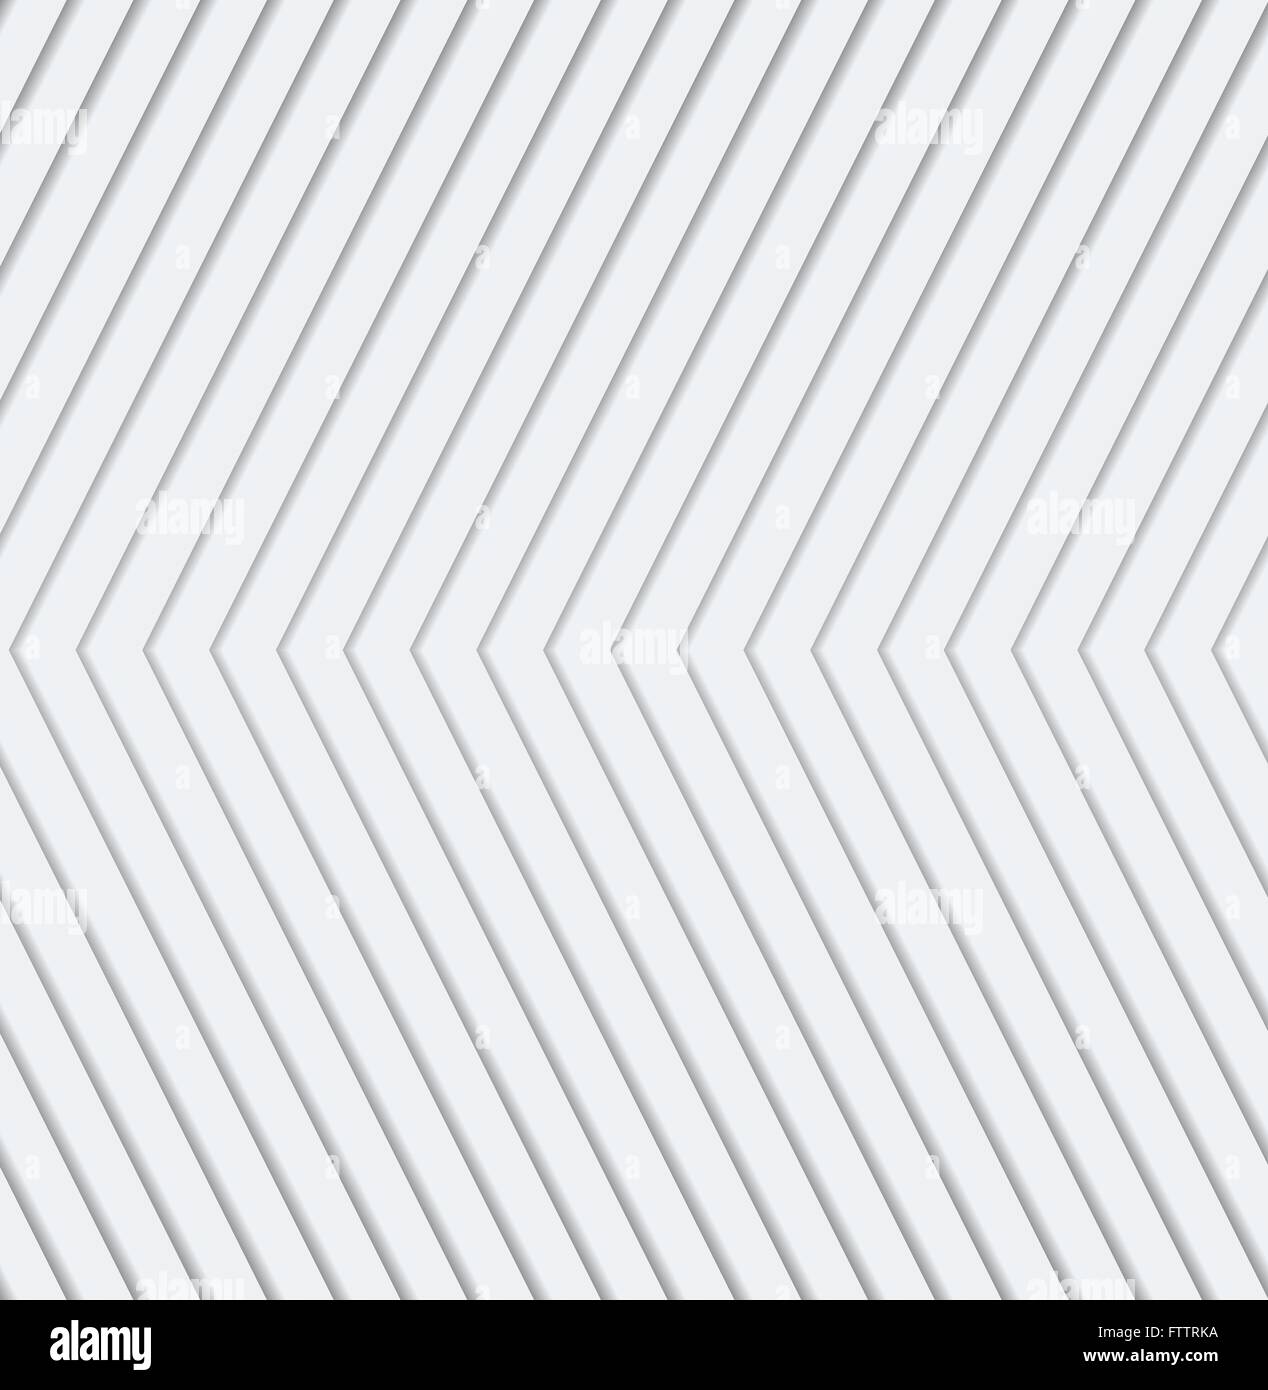 abstract geometric white lines background. vector Stock Vector